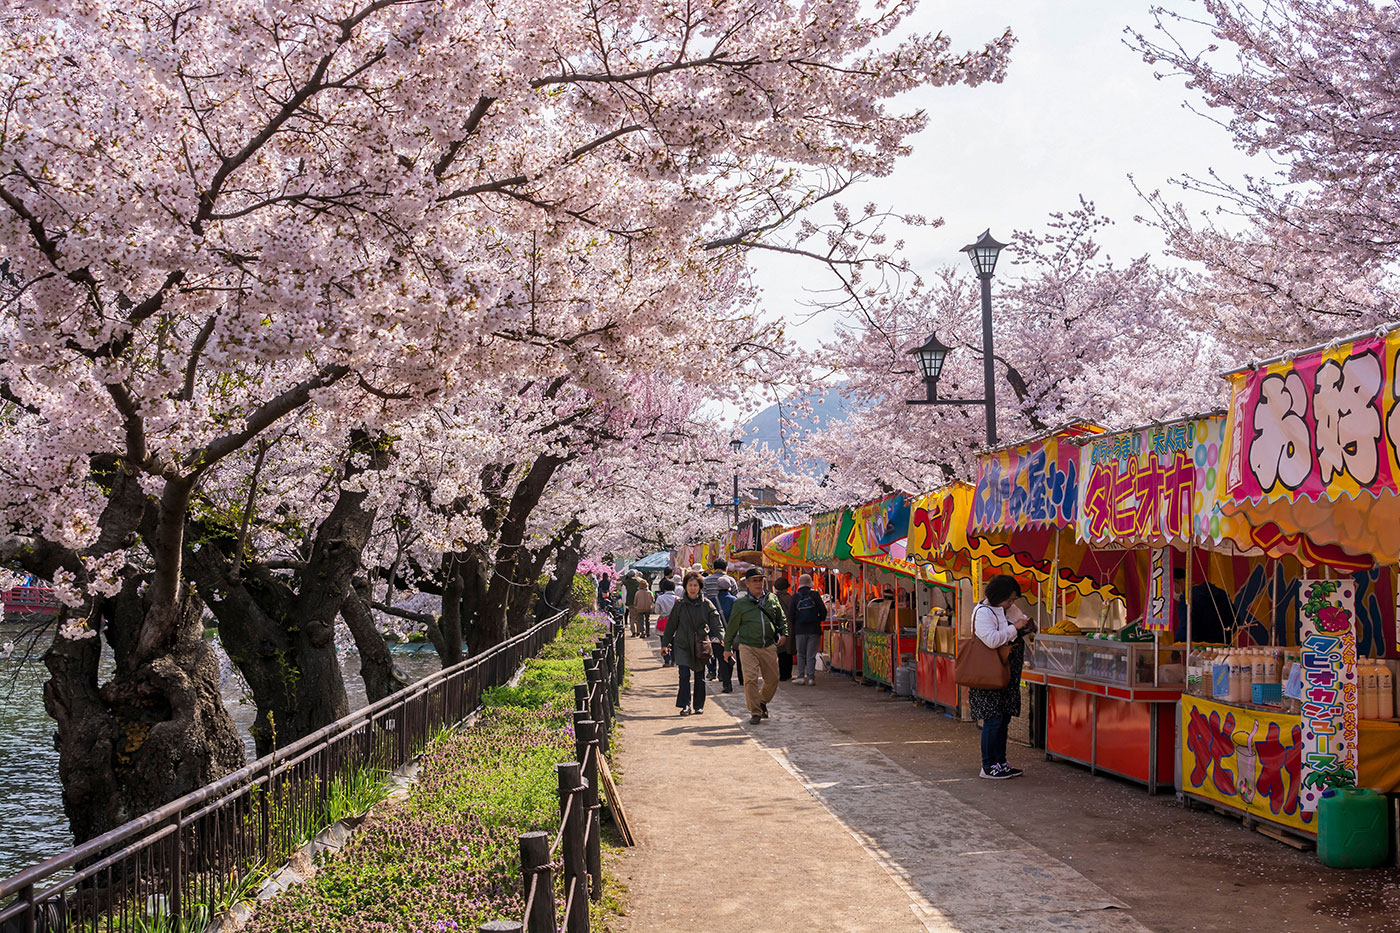 Top 14 places in Japan to see cherry blossom